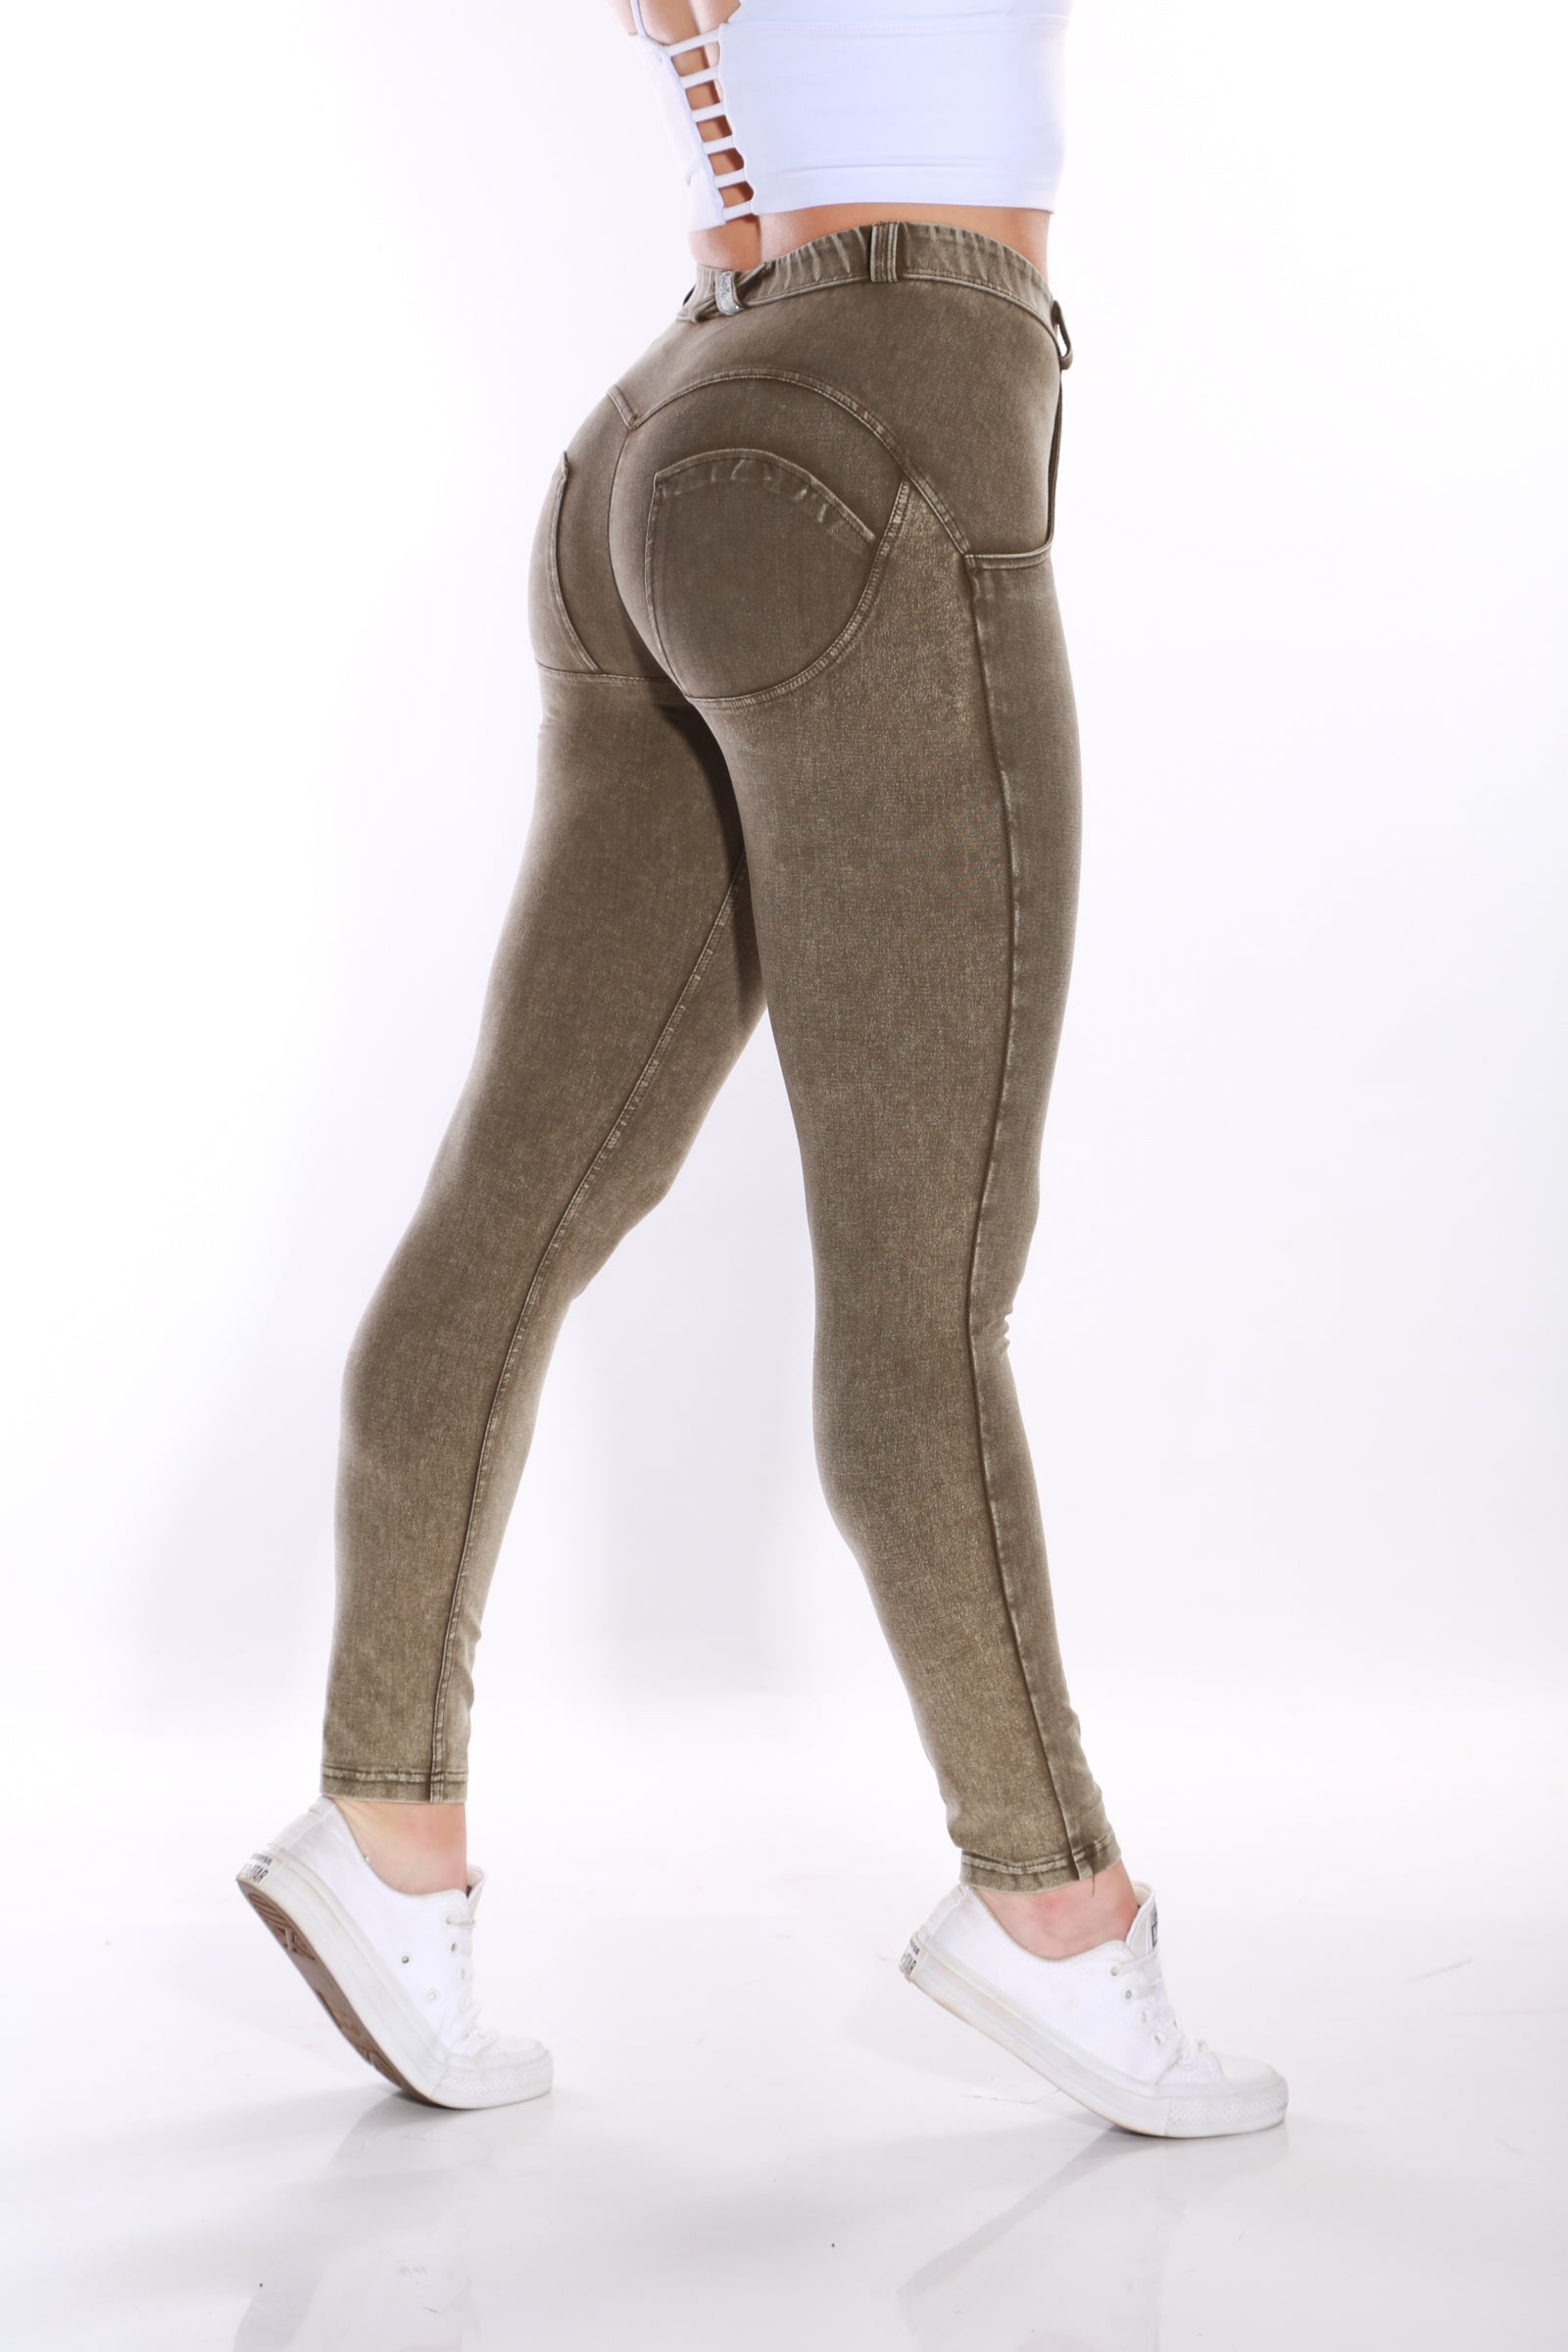 Image of Mid waist Butt lifting Shaping Jeans/Jeggings -  Olive stone